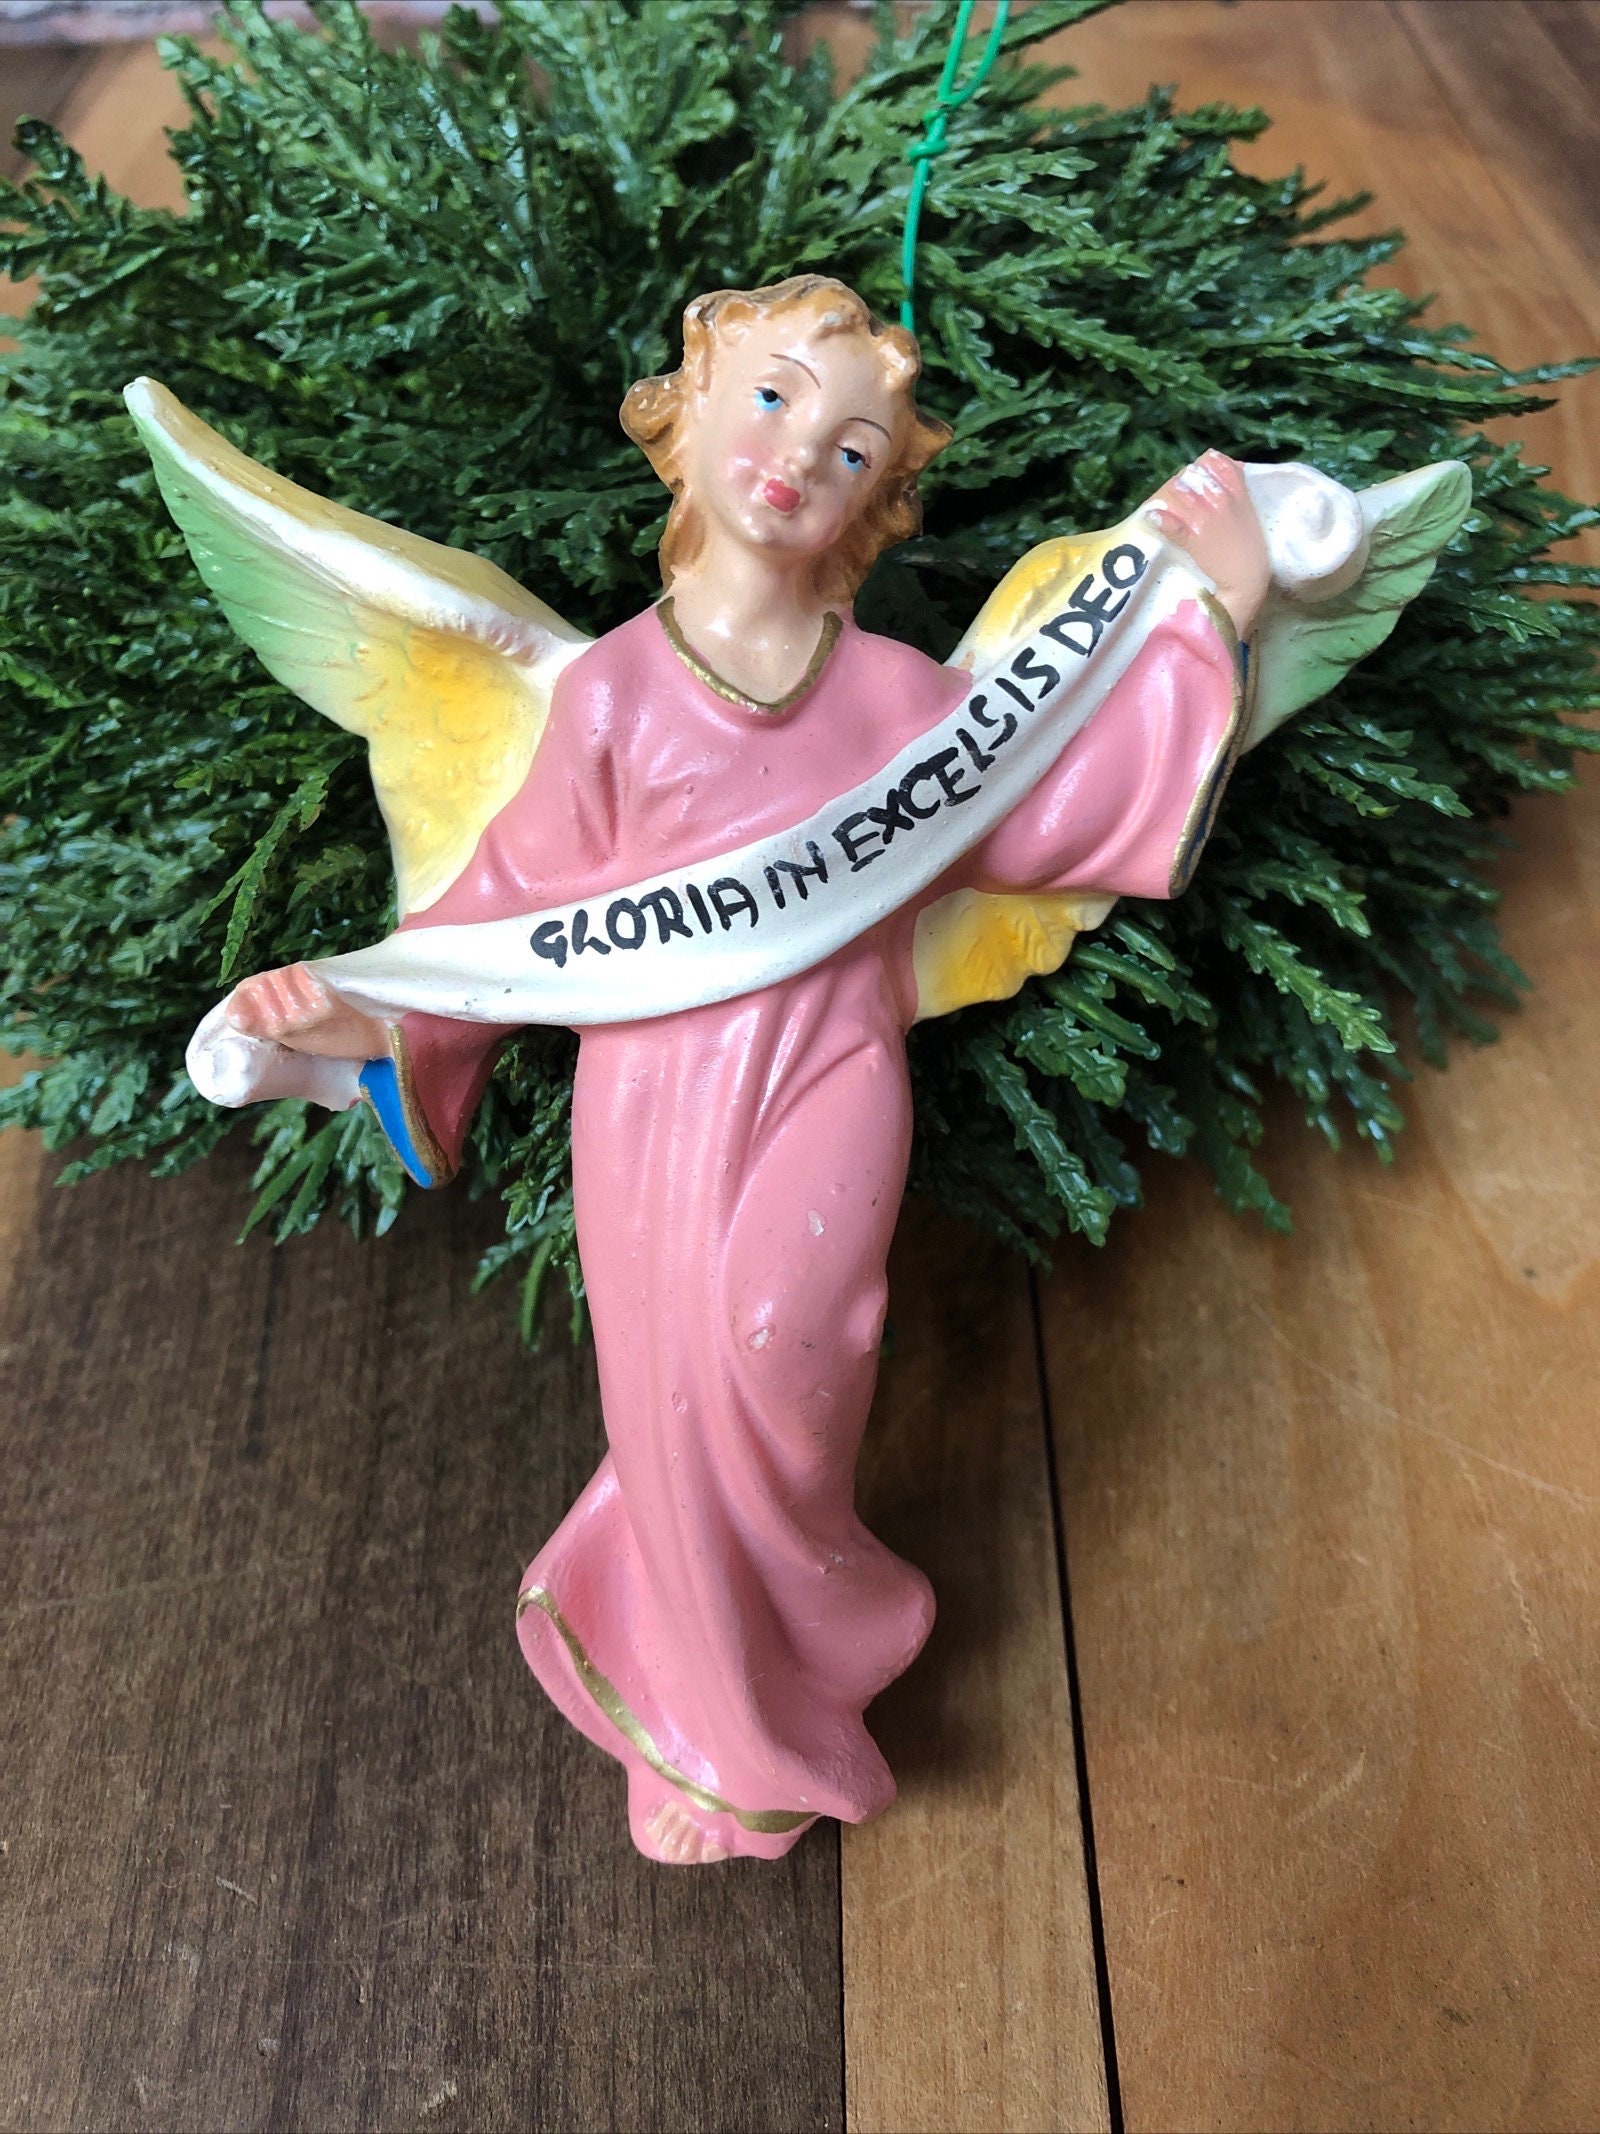 Nativity　Excelsis　Hanging　In　Gloria　海外　Ornament　Vintage　即決-　Deo　Italy　Angel　Pink